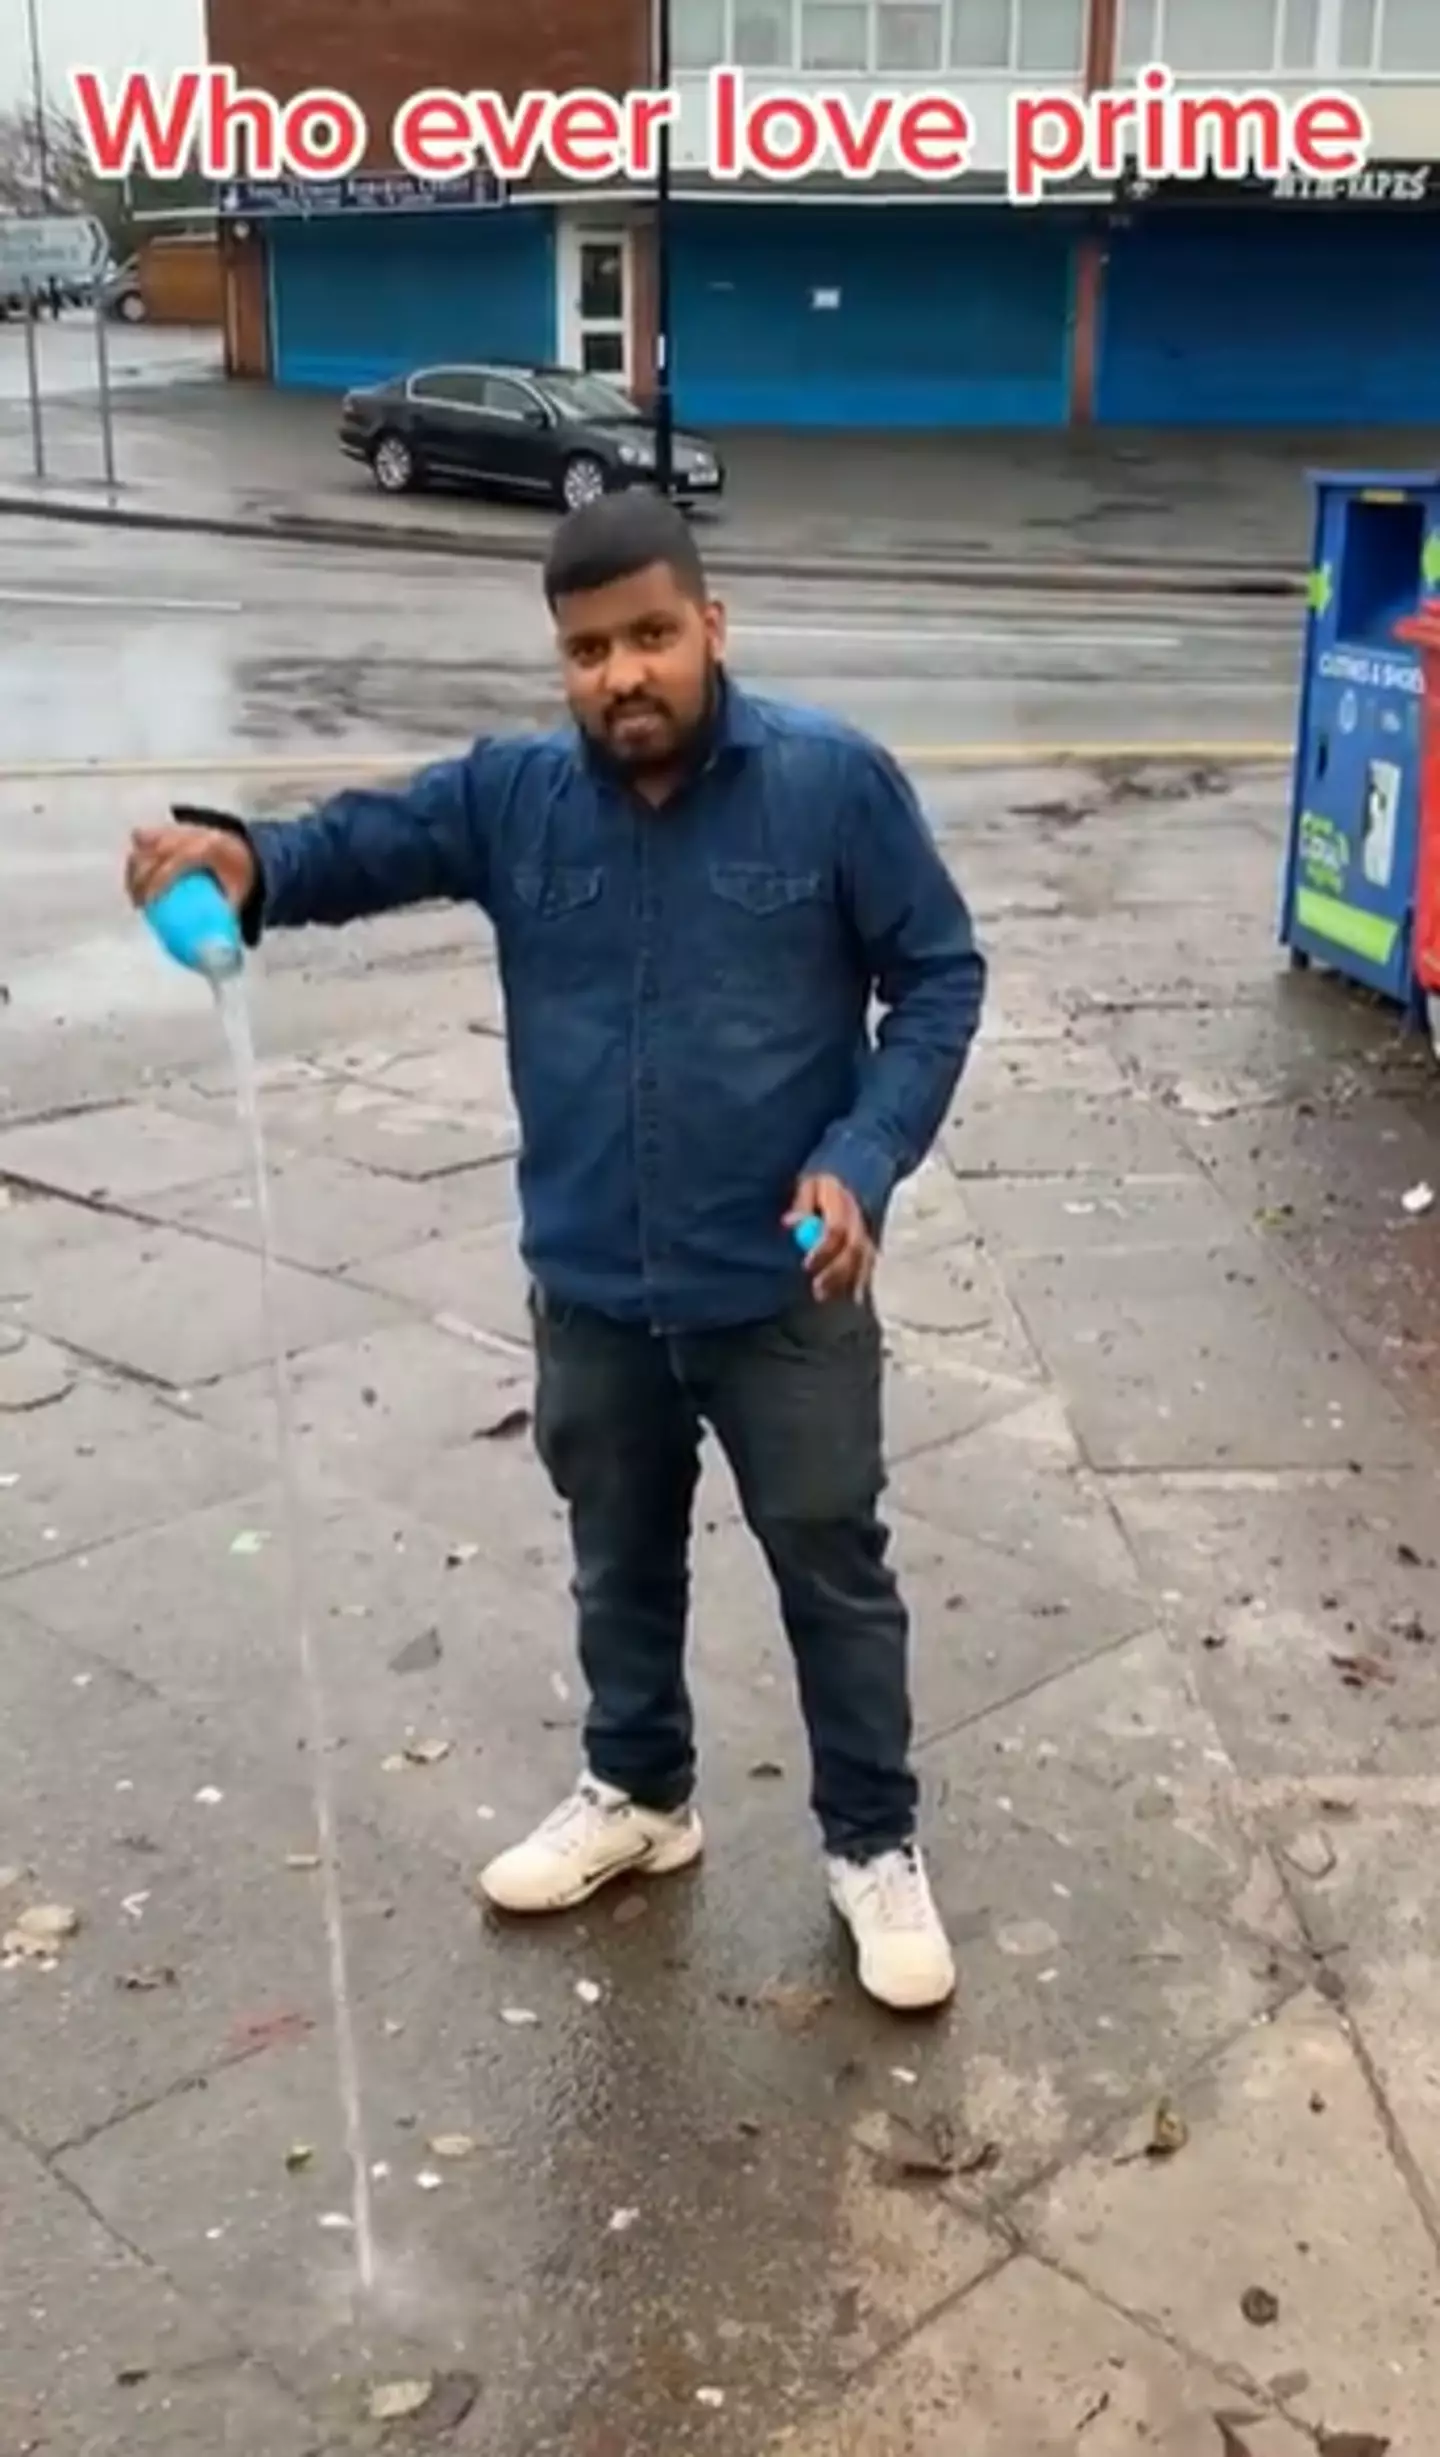 TikToker Saru Rajah, posted a viral video of him 'emptying' a bottle of Prime onto the street.